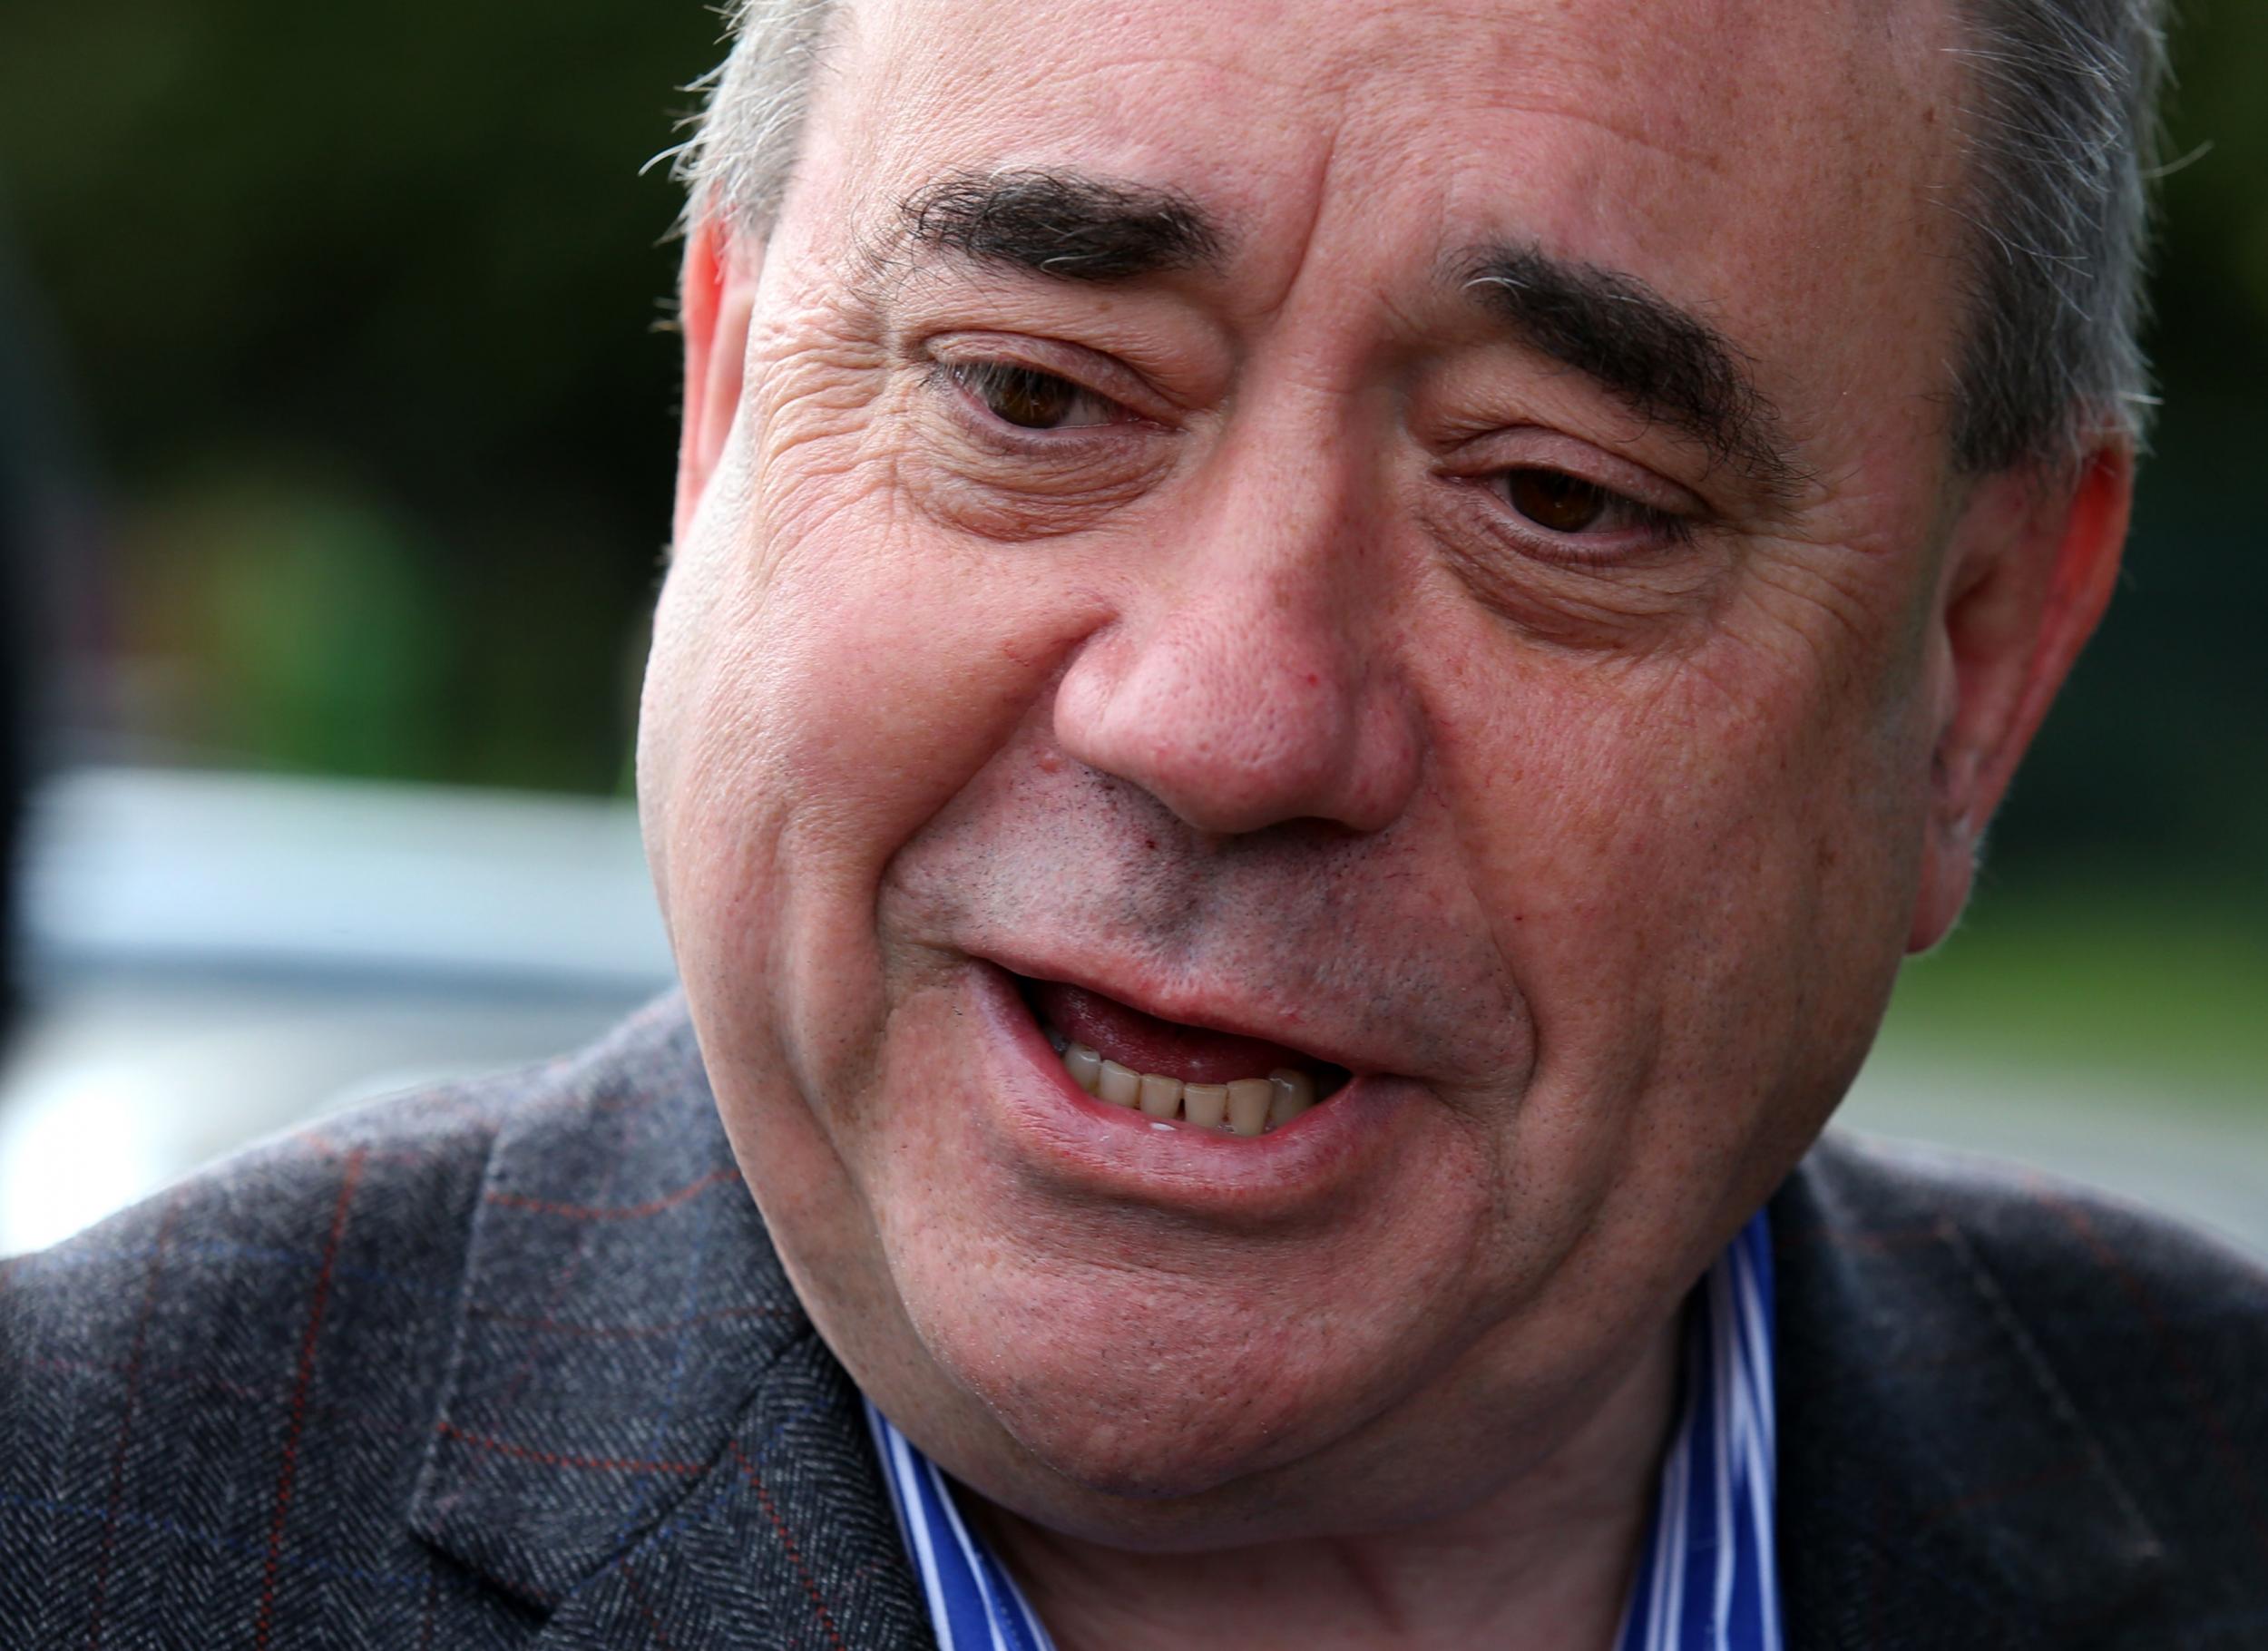 Alex Salmond poured scorn on suggestions he pushed Nicola Sturgeon into calling a second Scottish independence referendum